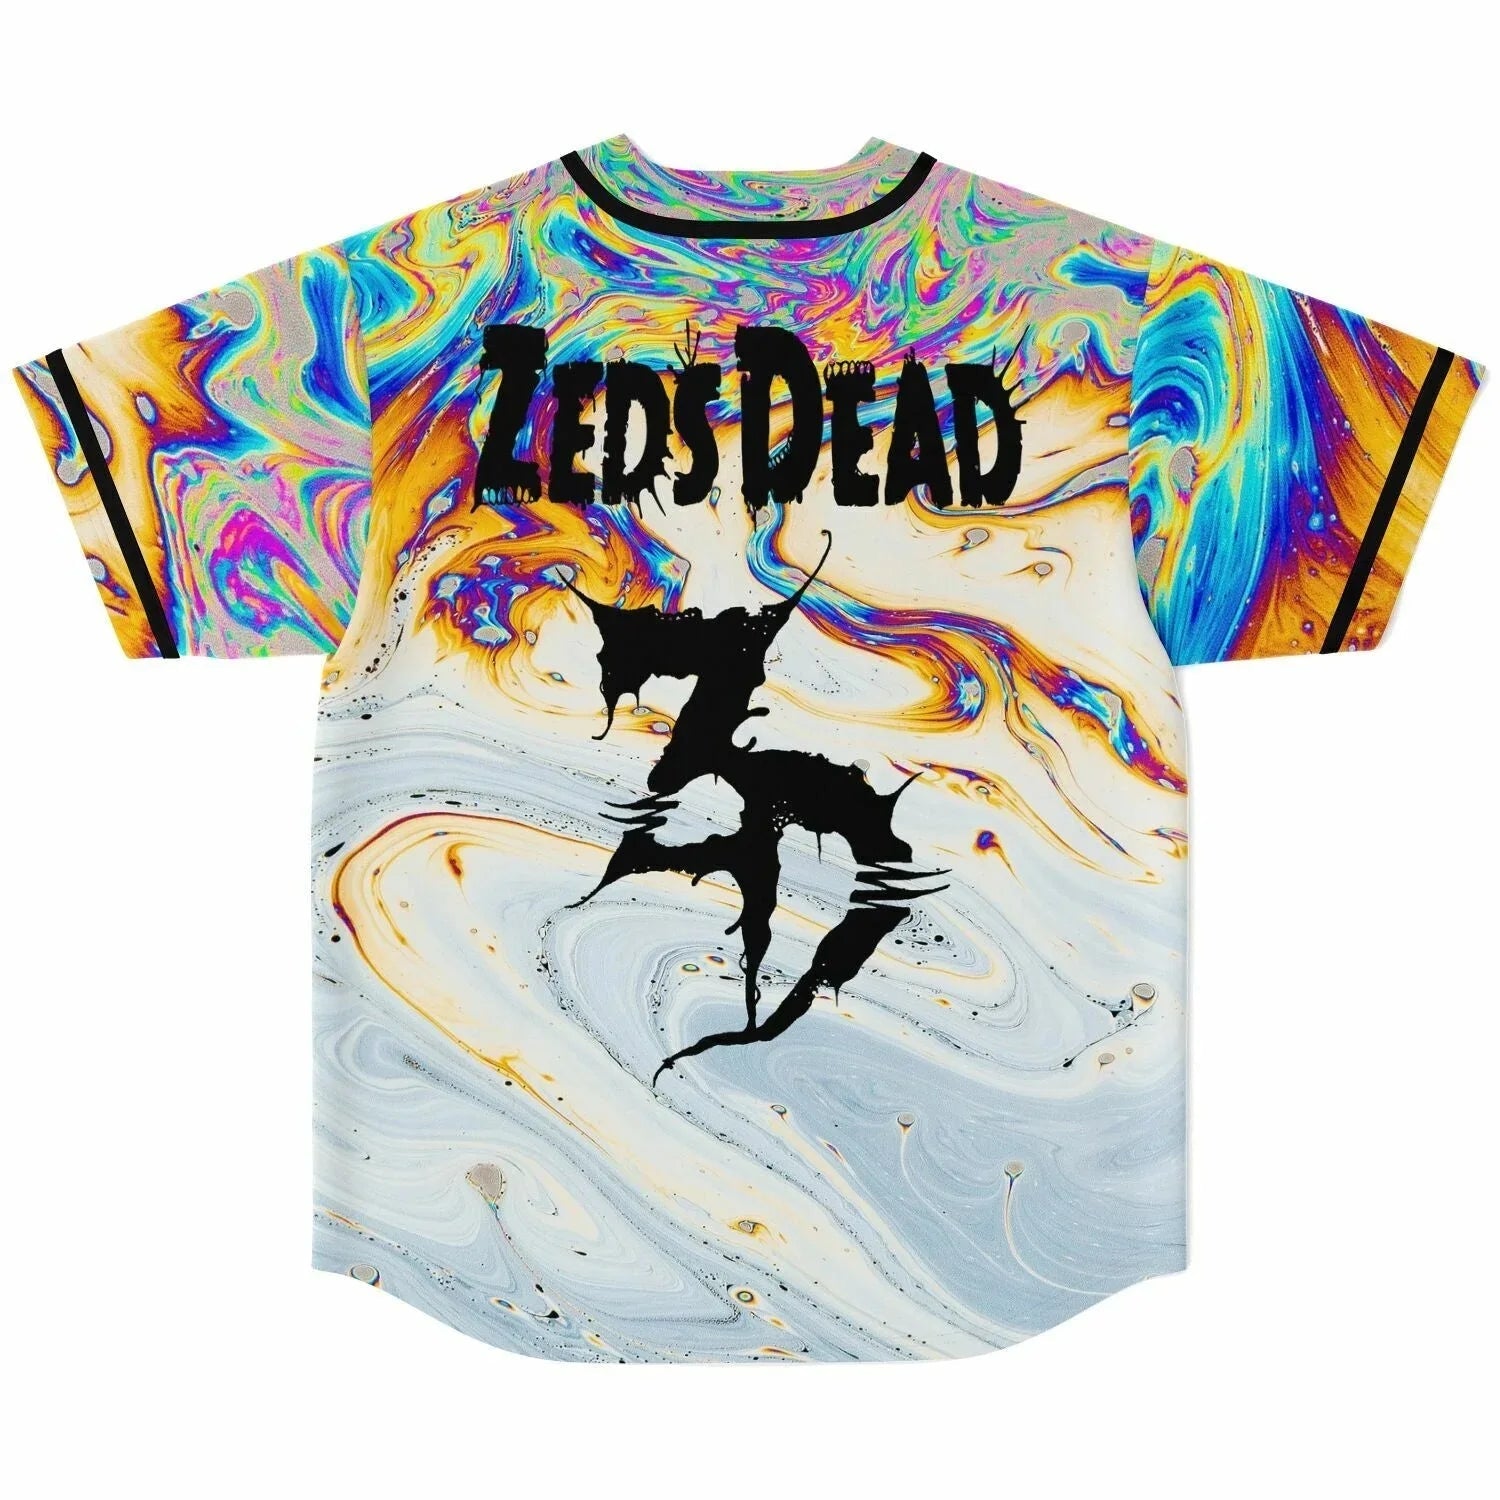 Zeds Dead Acid trip Baseball Jersey S13 - The Rave Cave